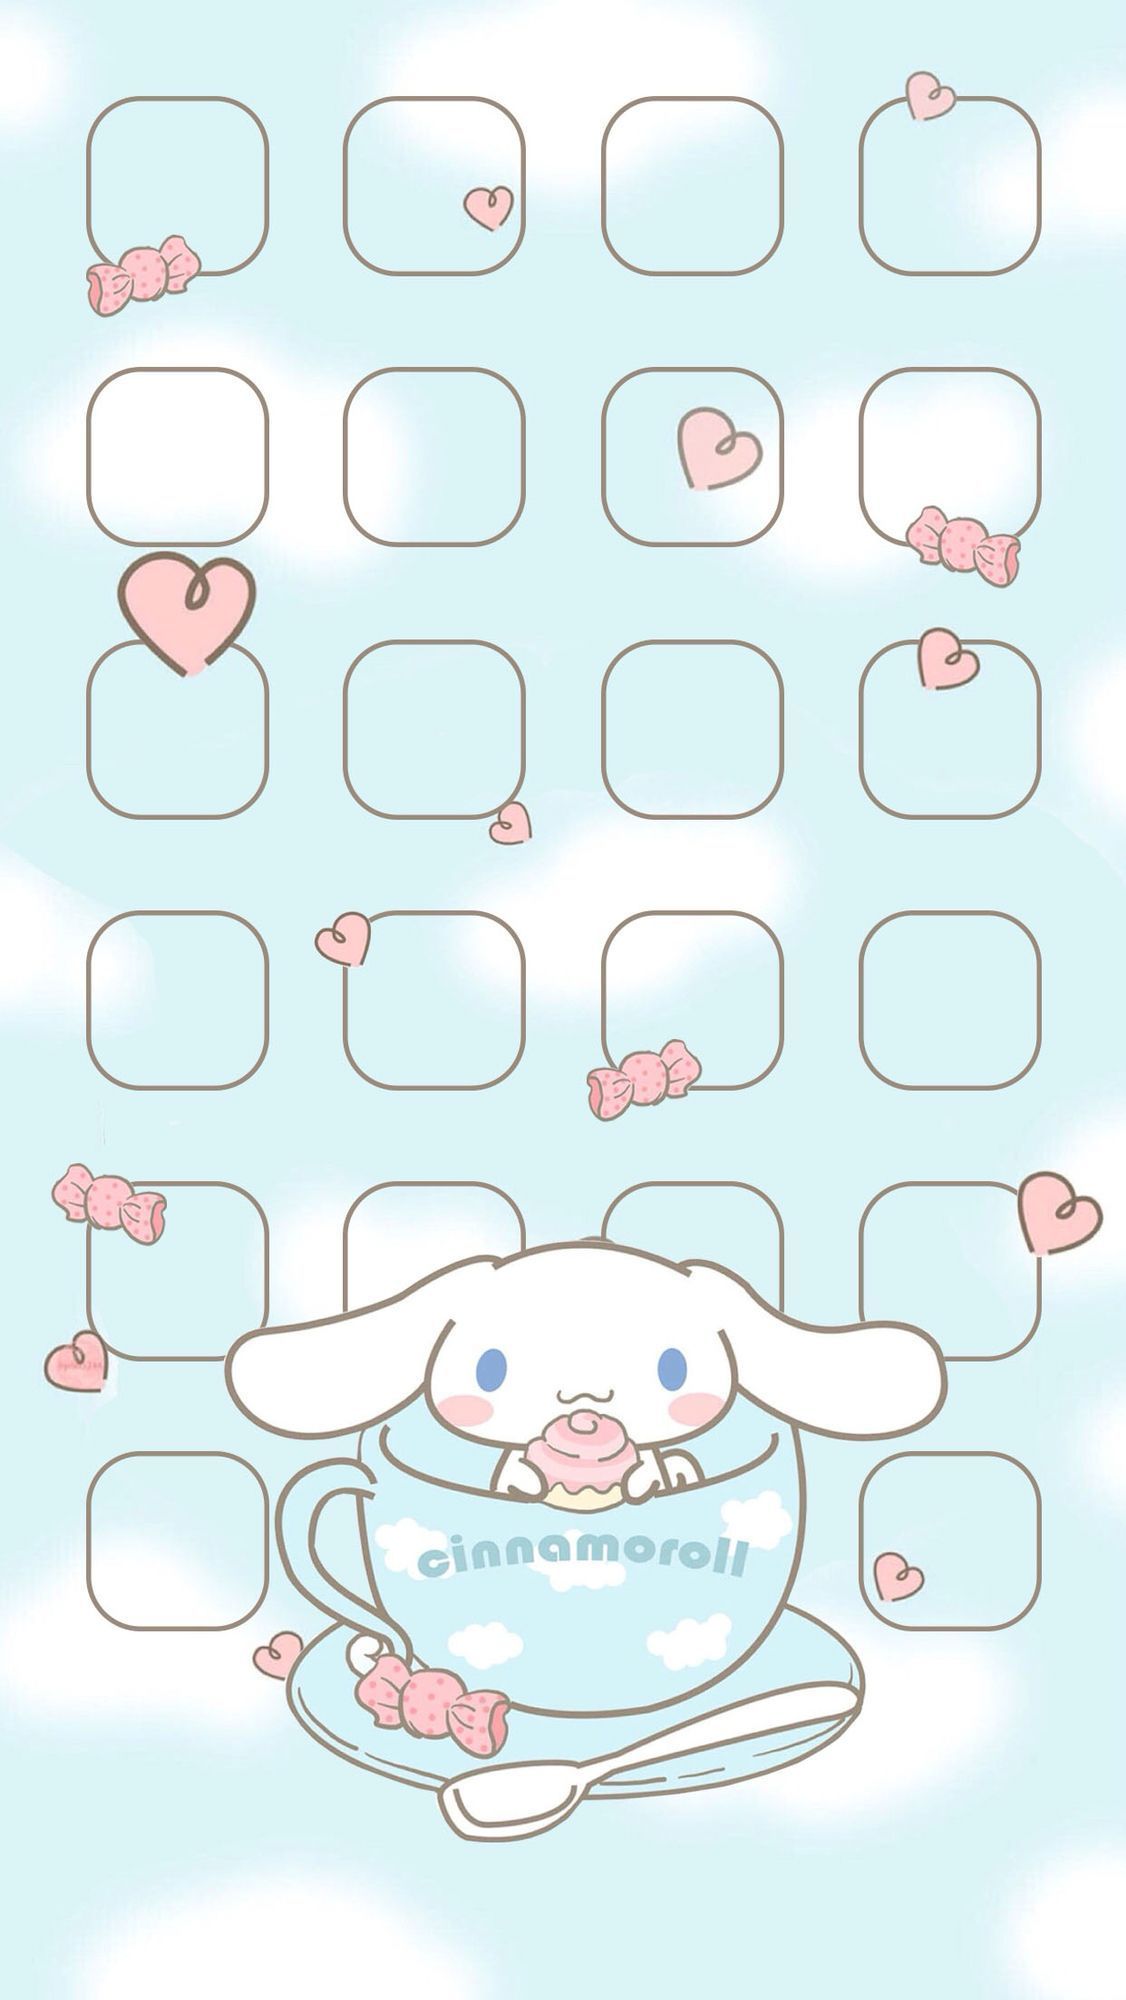 20 Cute Hello Kitty Wallpaper Ideas  Blue and Pink Ombre Background  Idea  Wallpapers  iPhone WallpapersColor Schemes